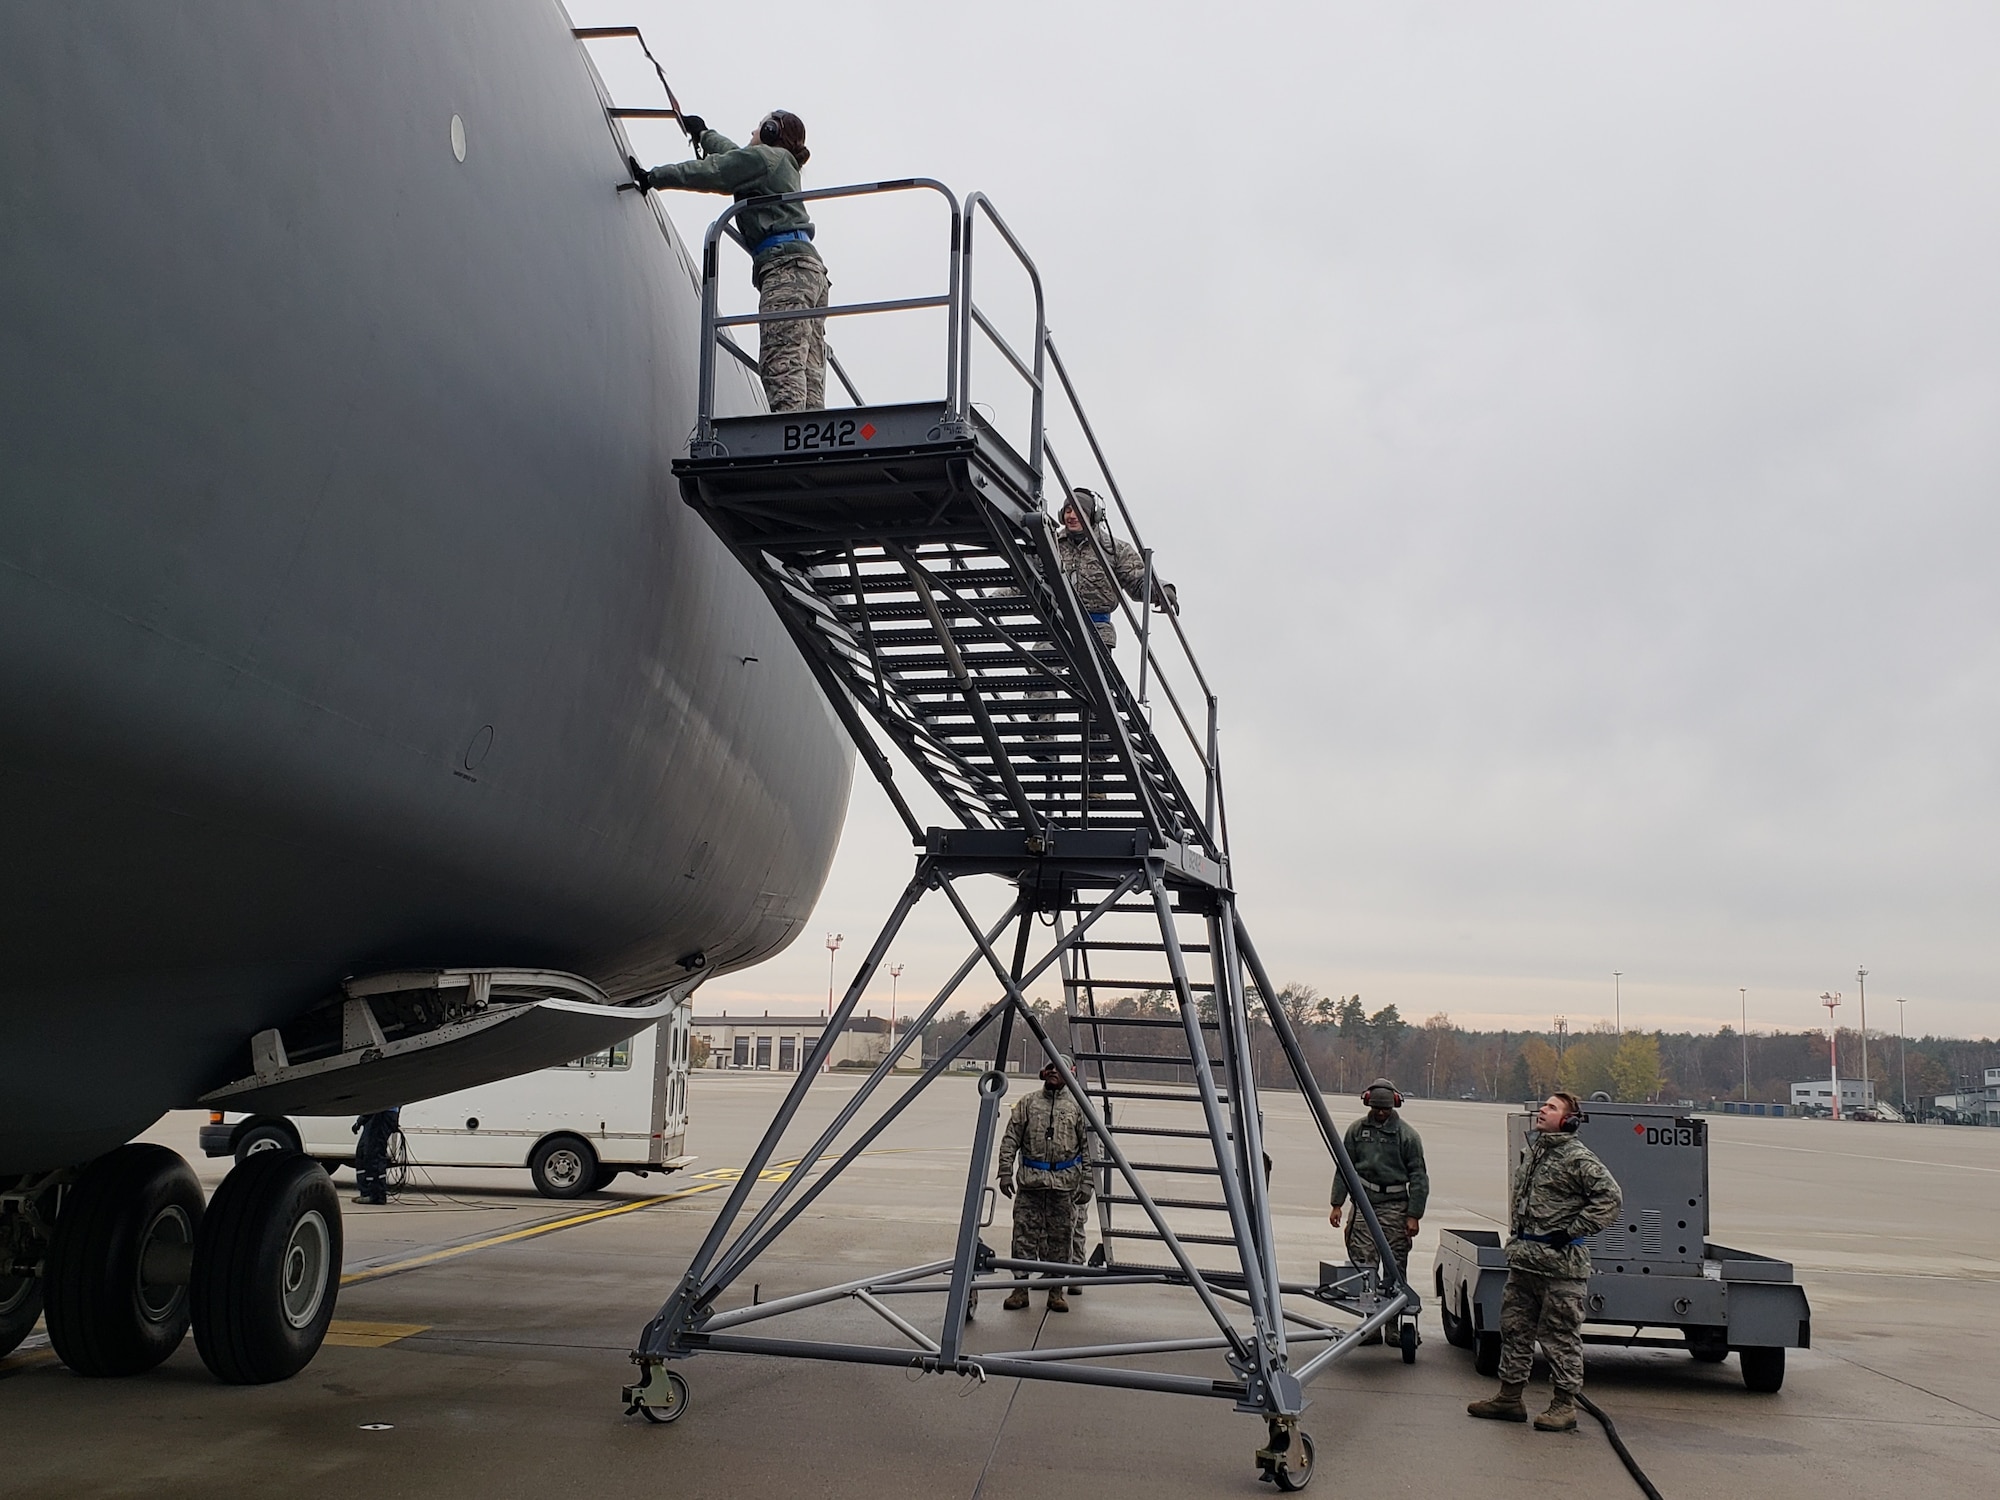 Aircraft maintainers assigned to the 512th Airlift Wing perform a visor check on a C-5M Super Galaxy at Ramstein Air Base, Germany, Nov. 29, 2018. More than 30 512th maintainers traveled to Ramstein AB as a part of a two-week enroute training mission. (Courtesy photo)